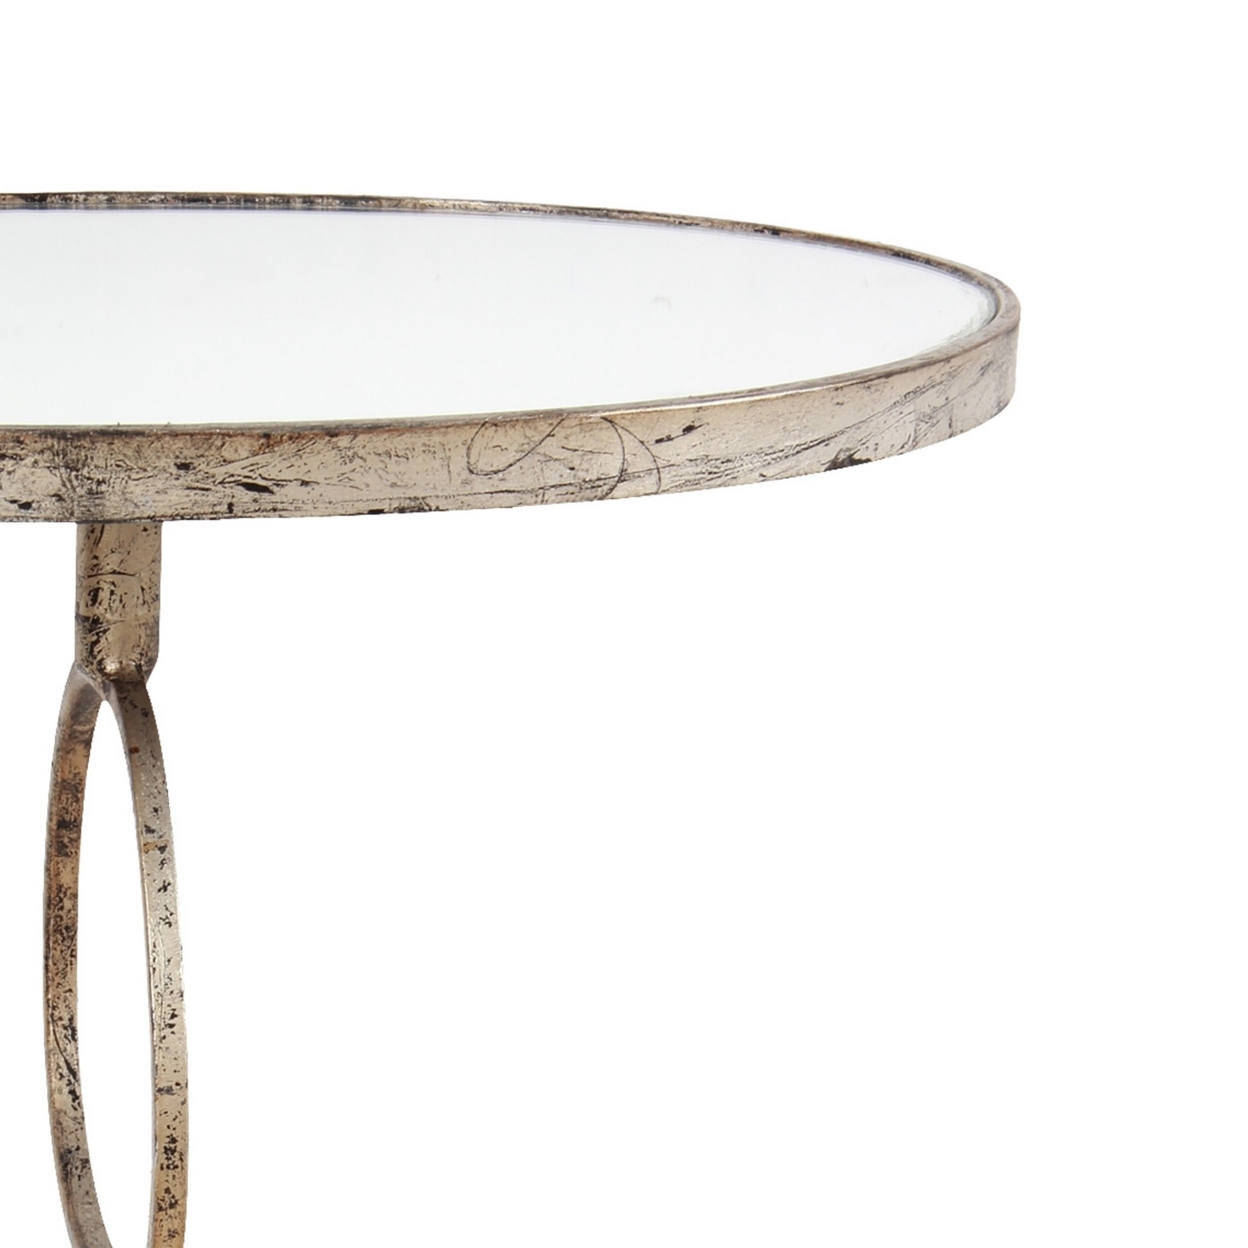 28 Inch Accent Side Table, Round Mirror Top, Metal Base, Rustic Gold Finish, Saltoro Sherpi